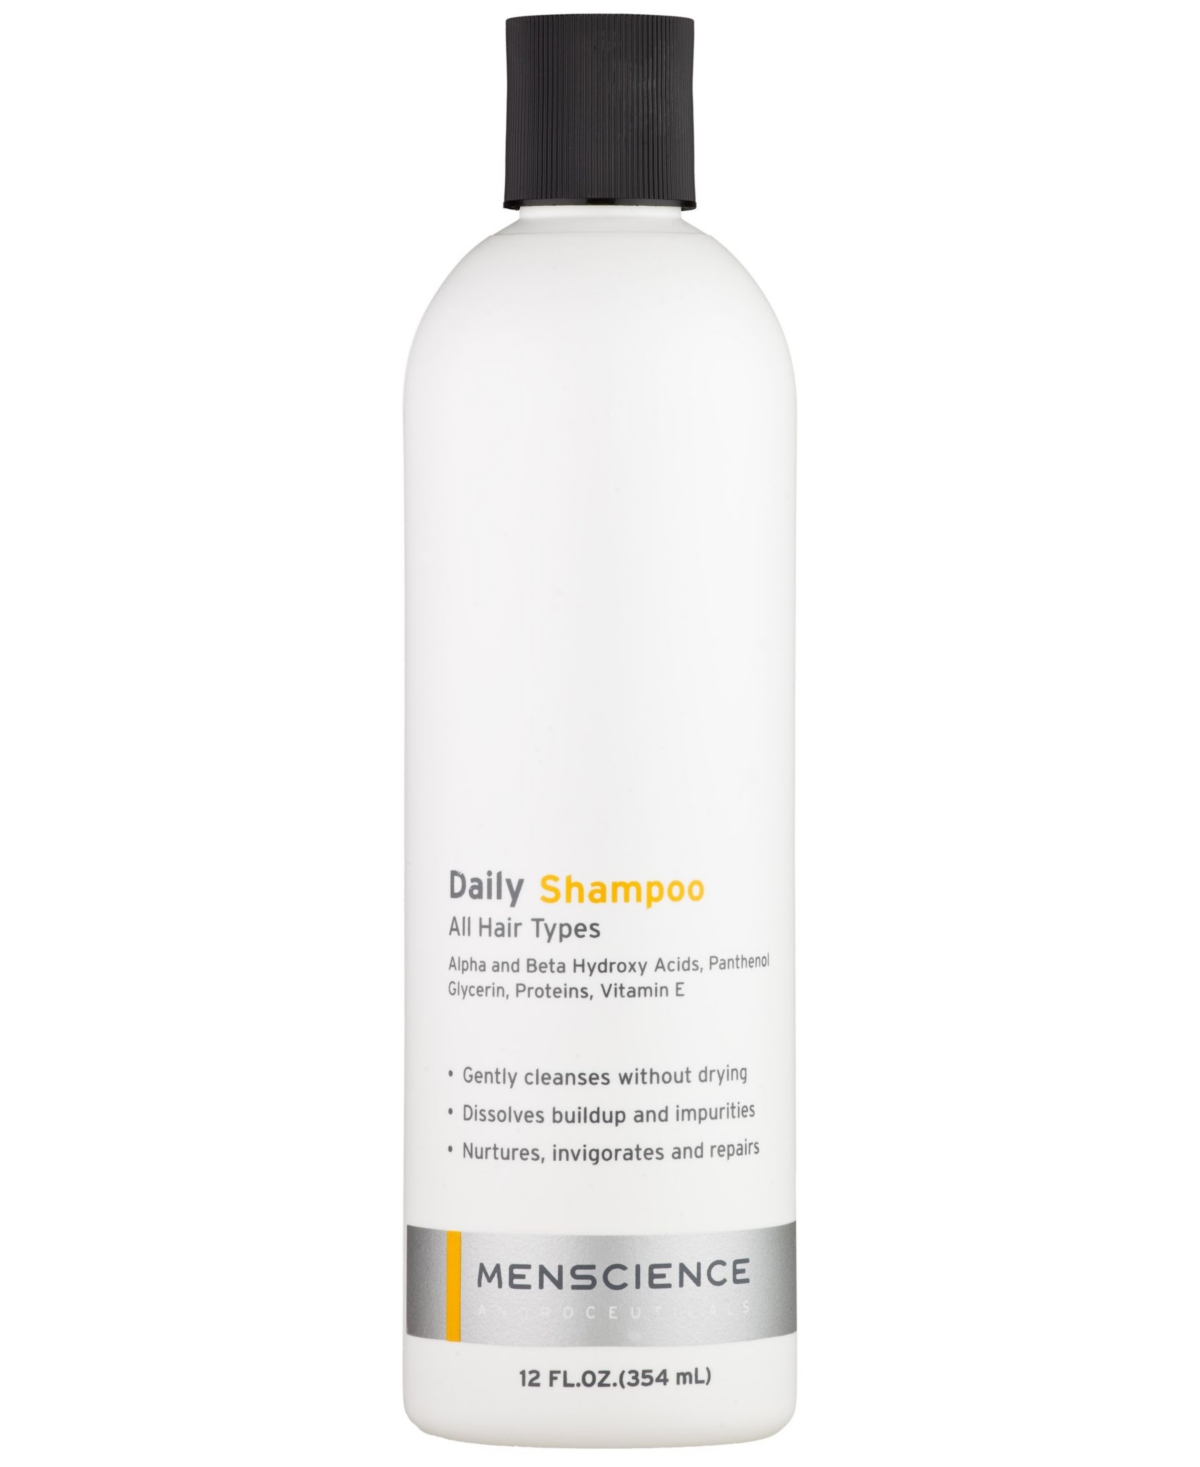 Daily Shampoo Unscented All Hair Types For Men, 12 oz.